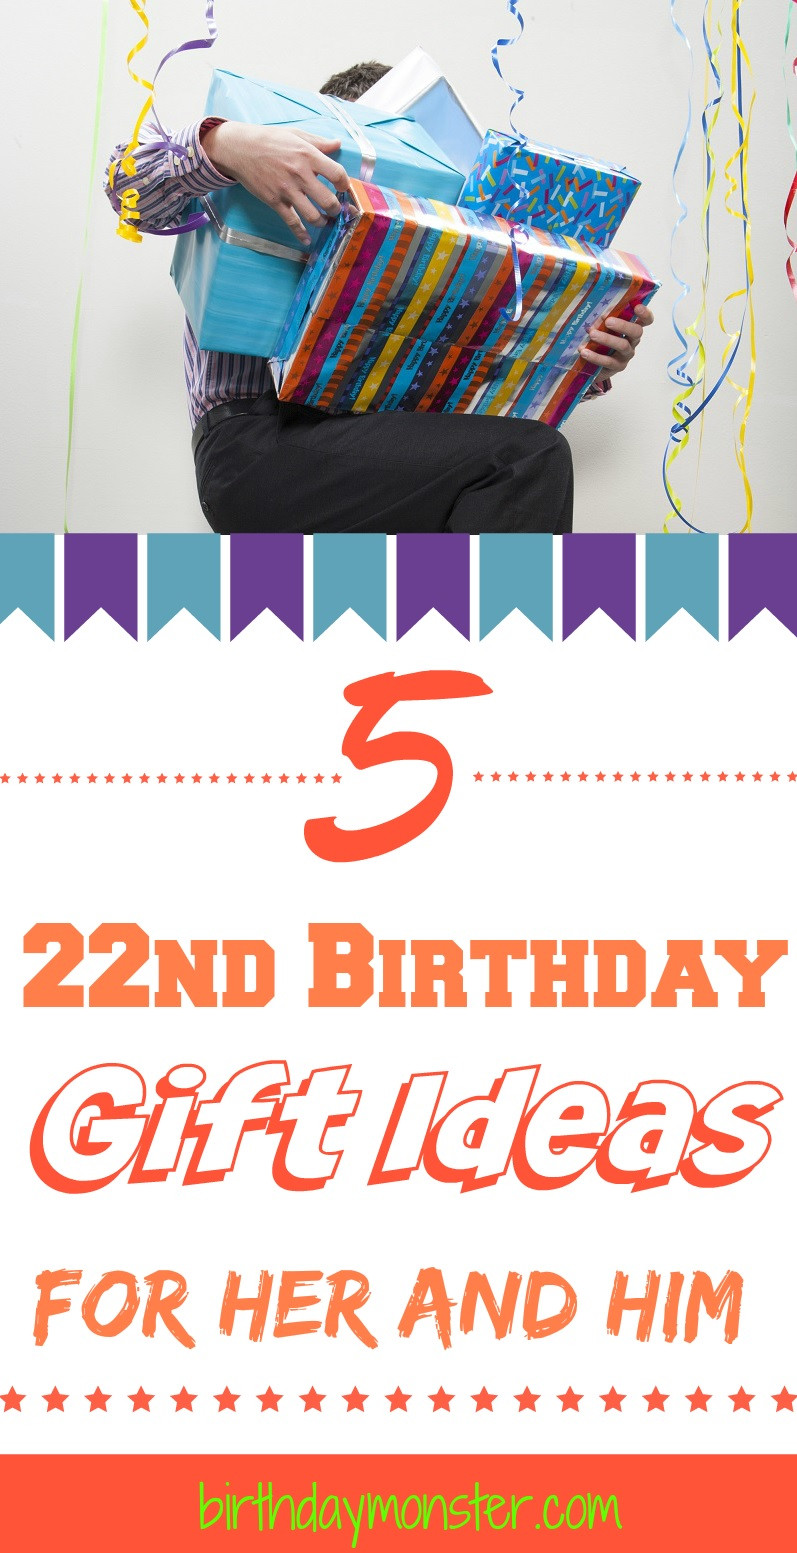 22Nd Anniversary Gift Ideas For Her
 22nd Birthday Gift Ideas for Her and Him Birthday Monster